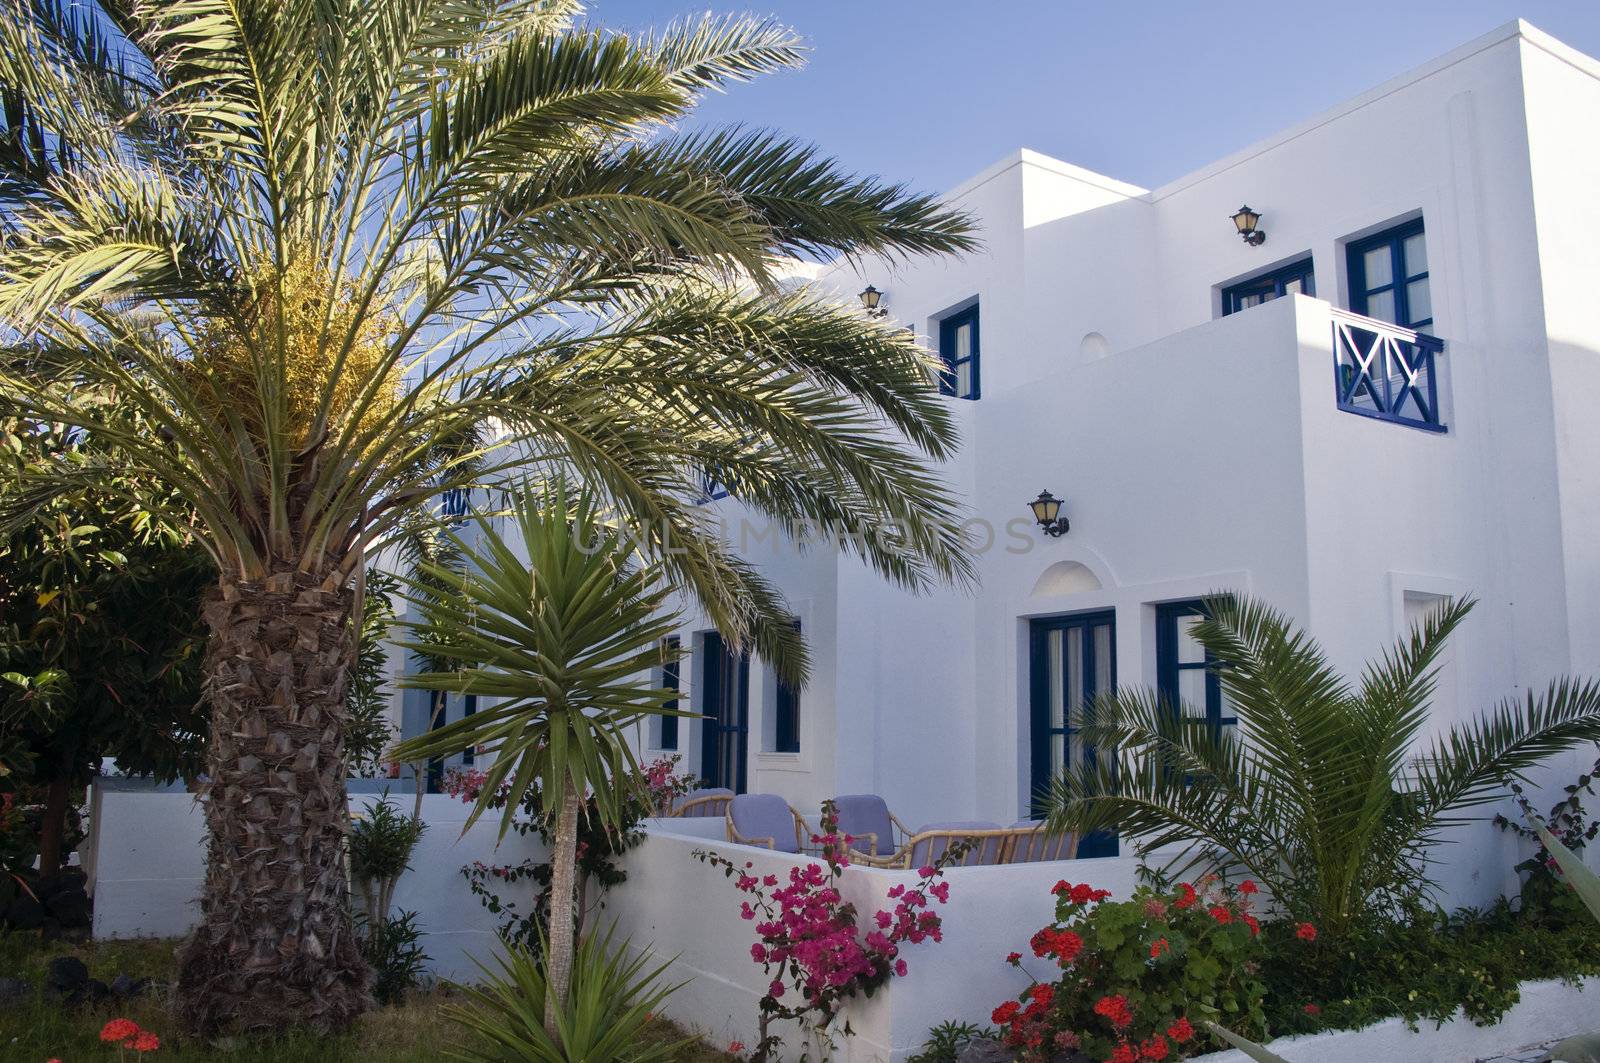 Greece House with Palm, taken in Naxos